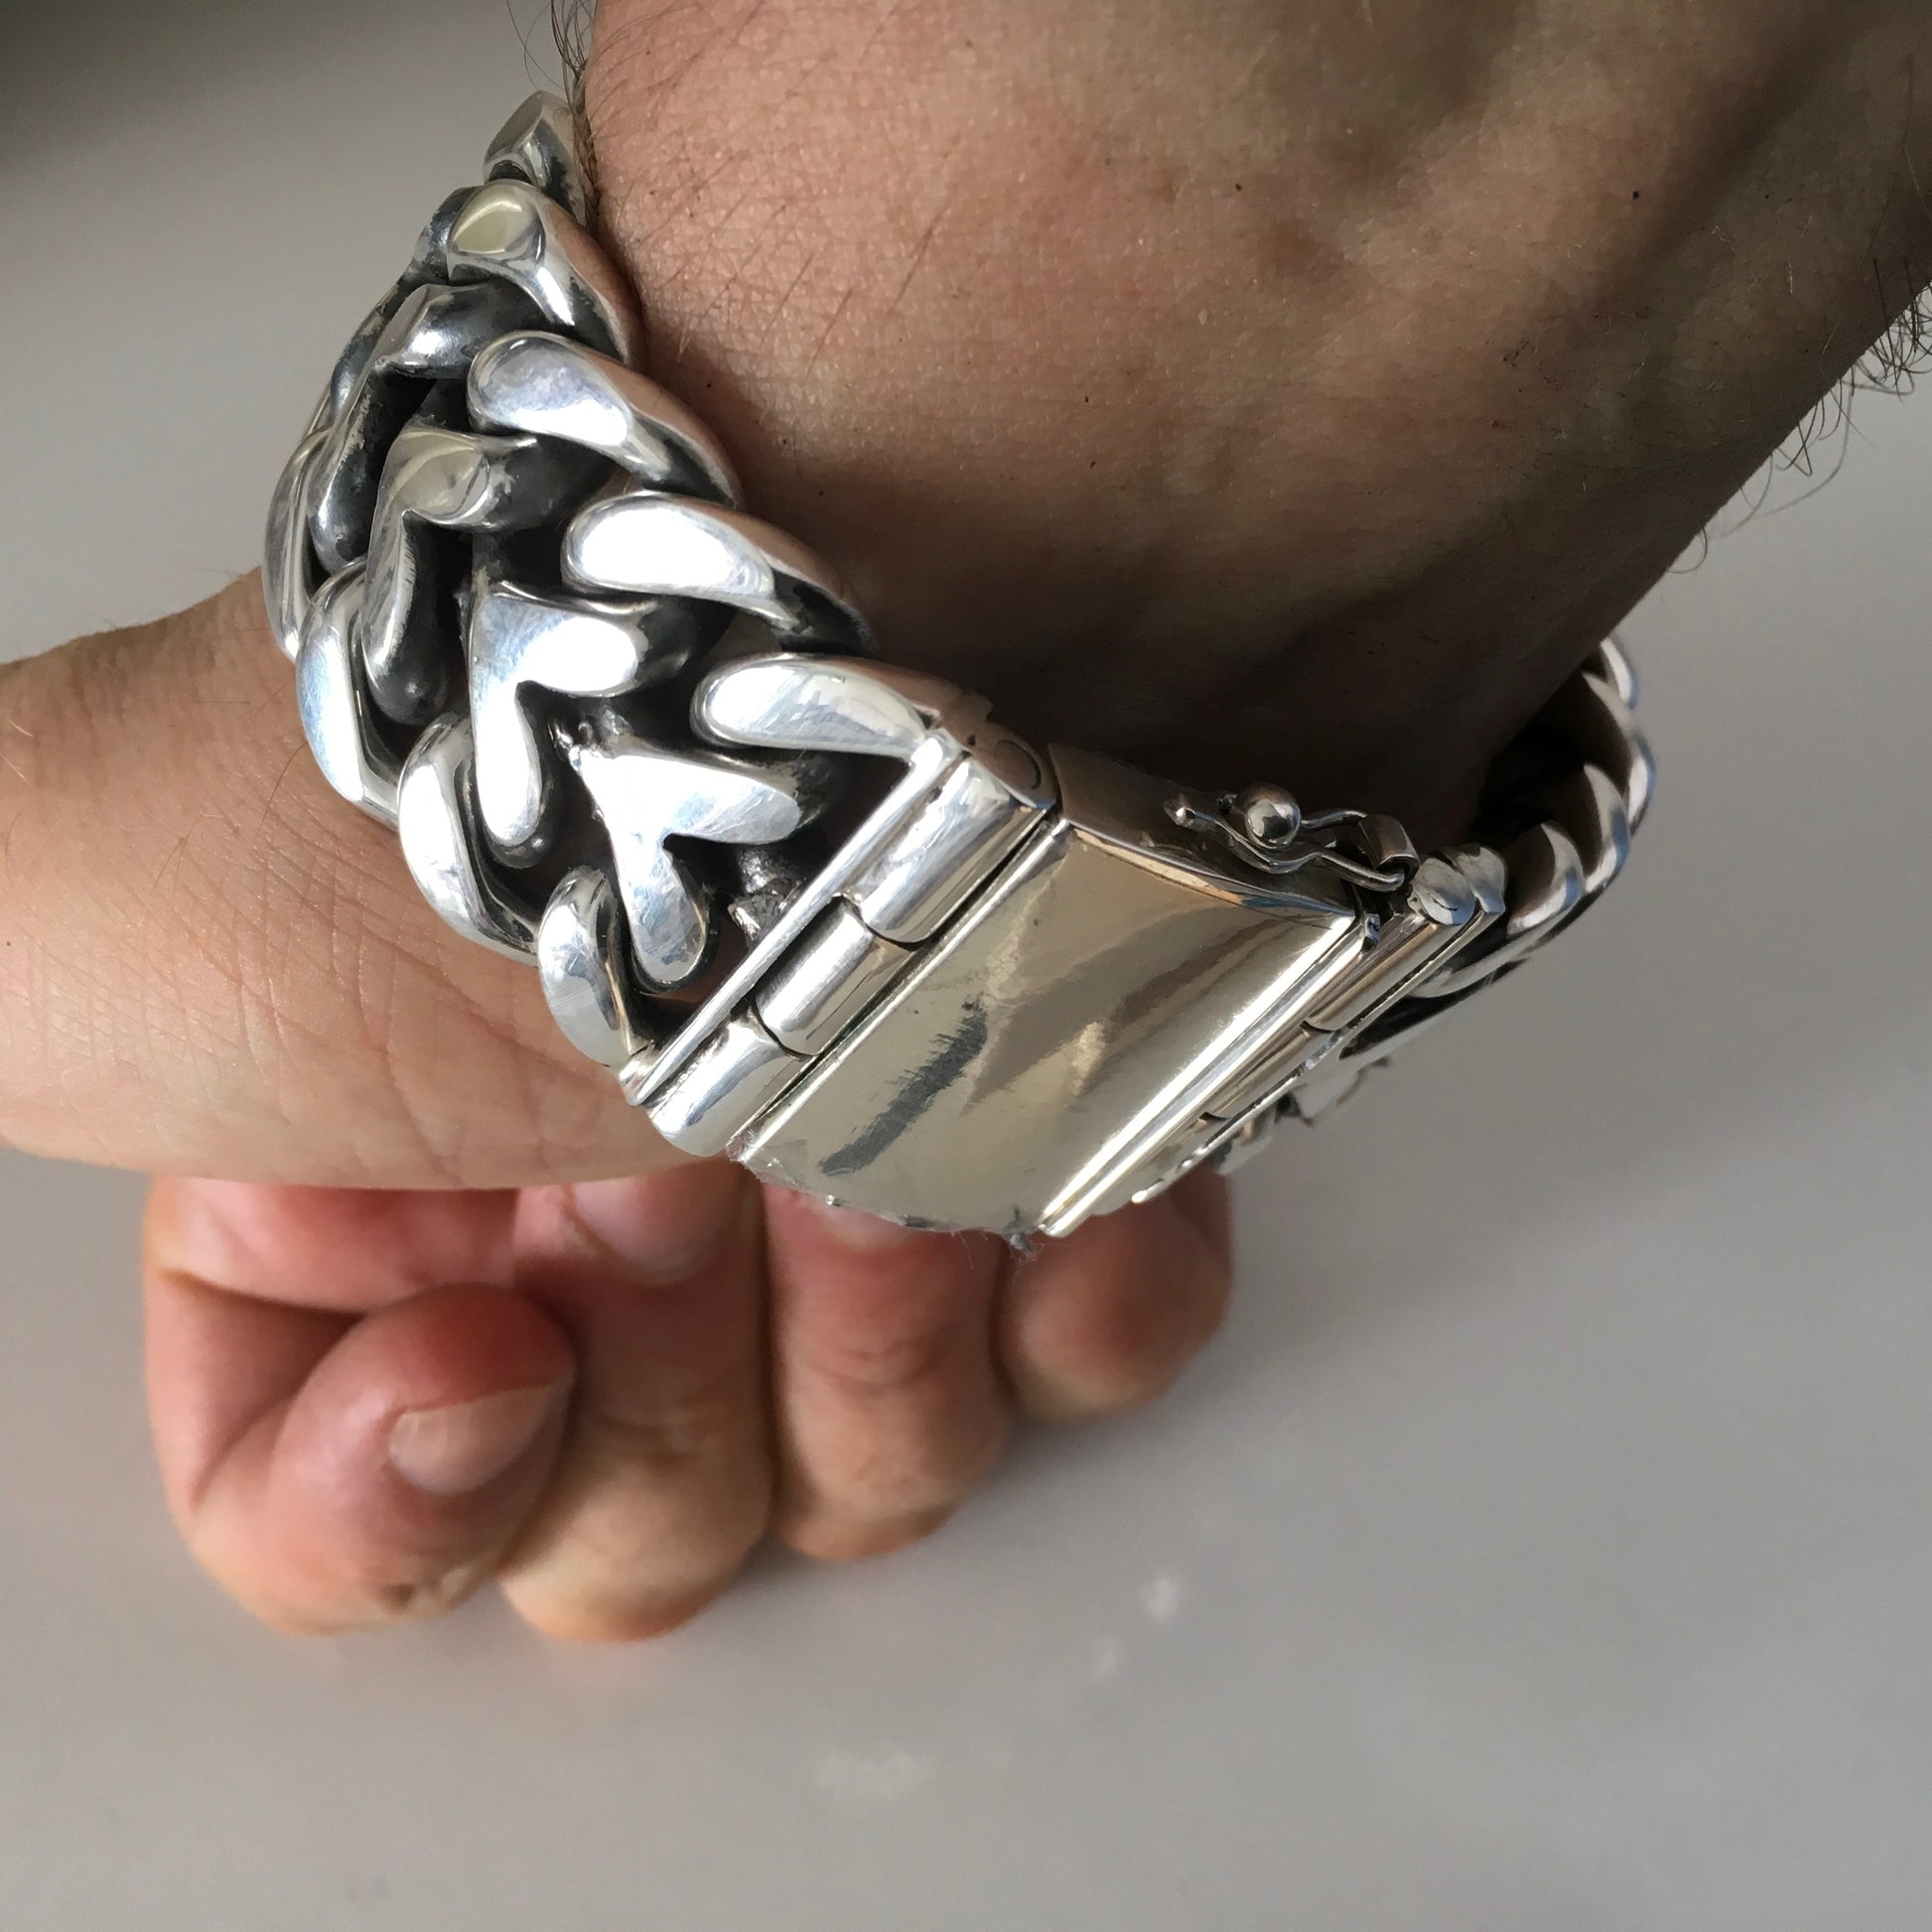 Handmade Tight Link Miami Cuban Chains Bracelets In 999 Silver